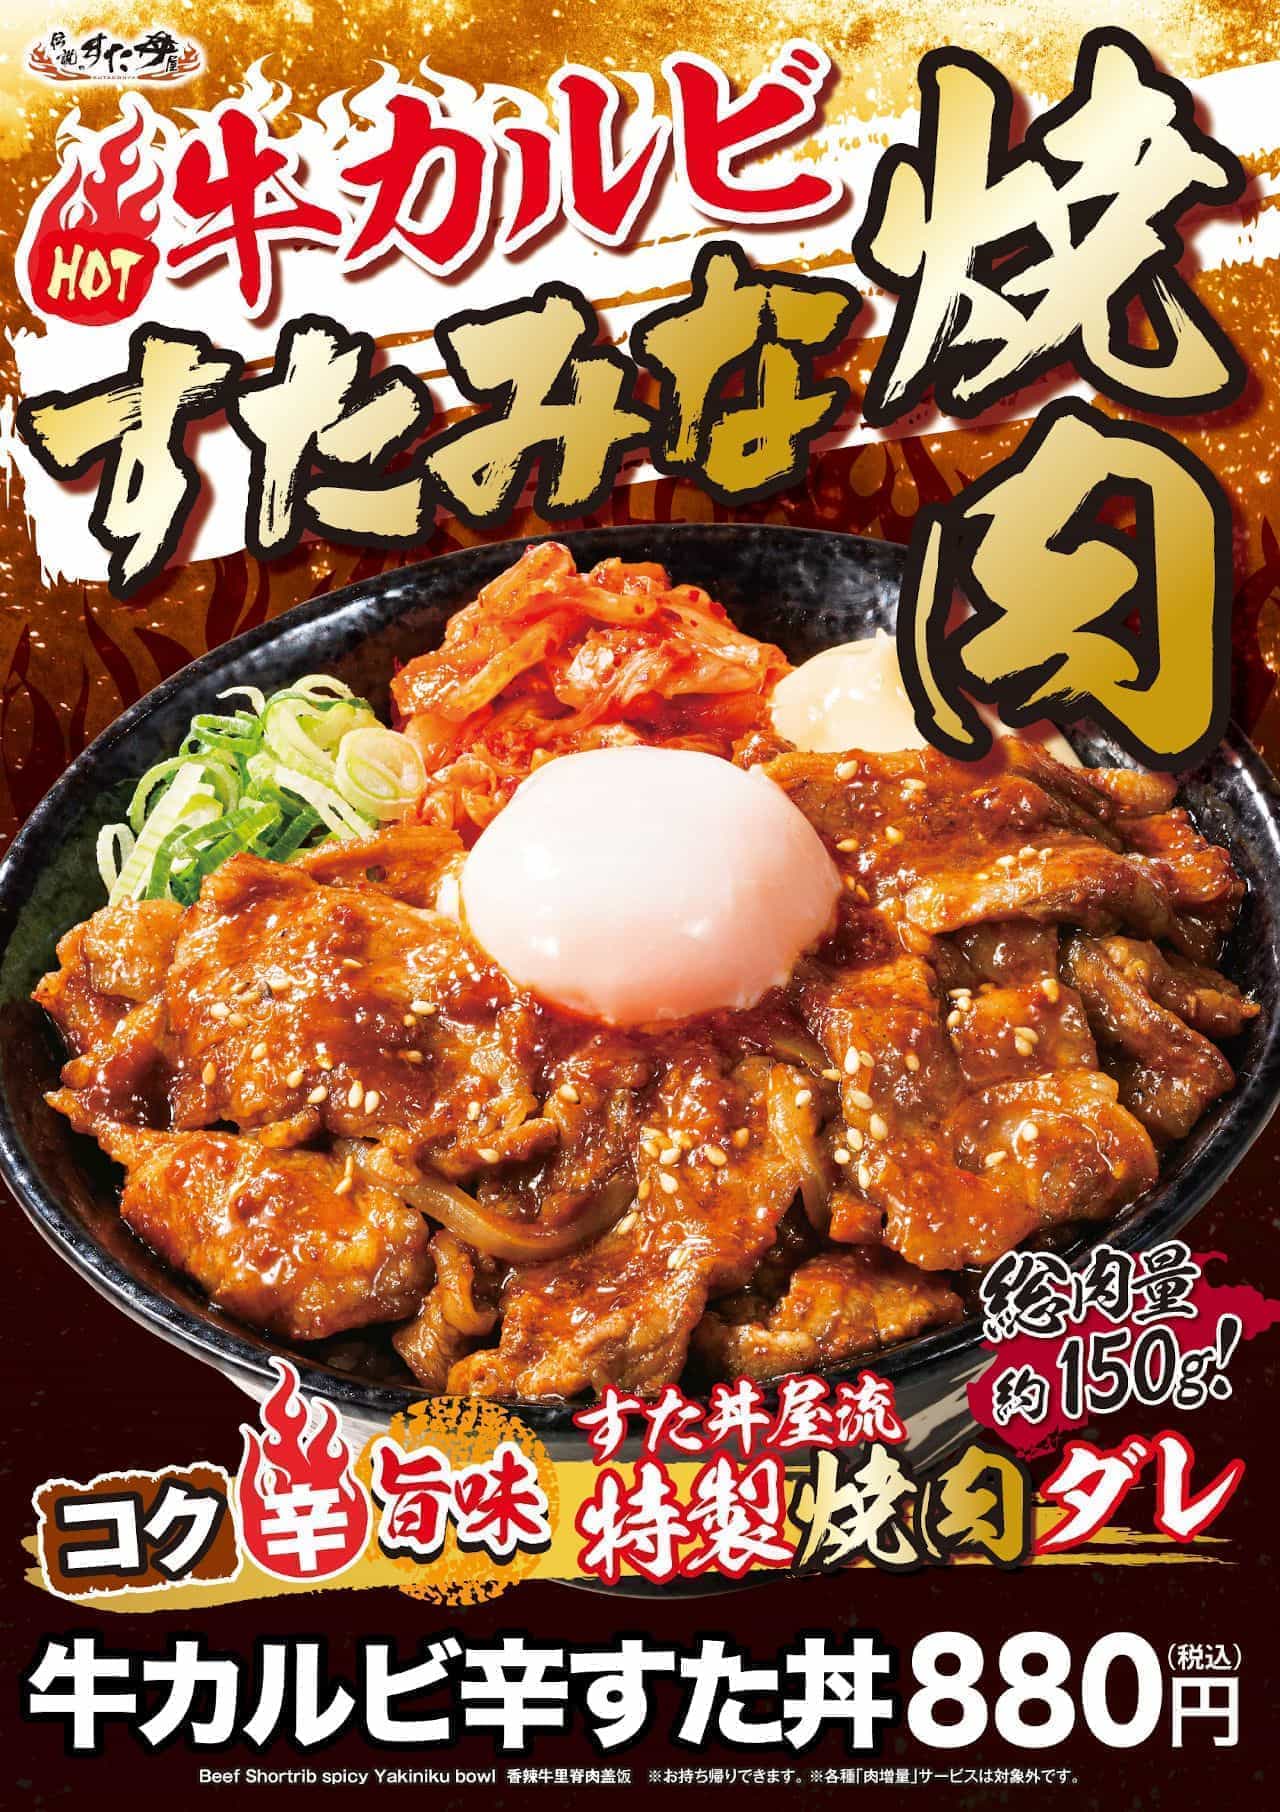 "Beef rib spicy rice bowl" at the legendary rice bowl shop